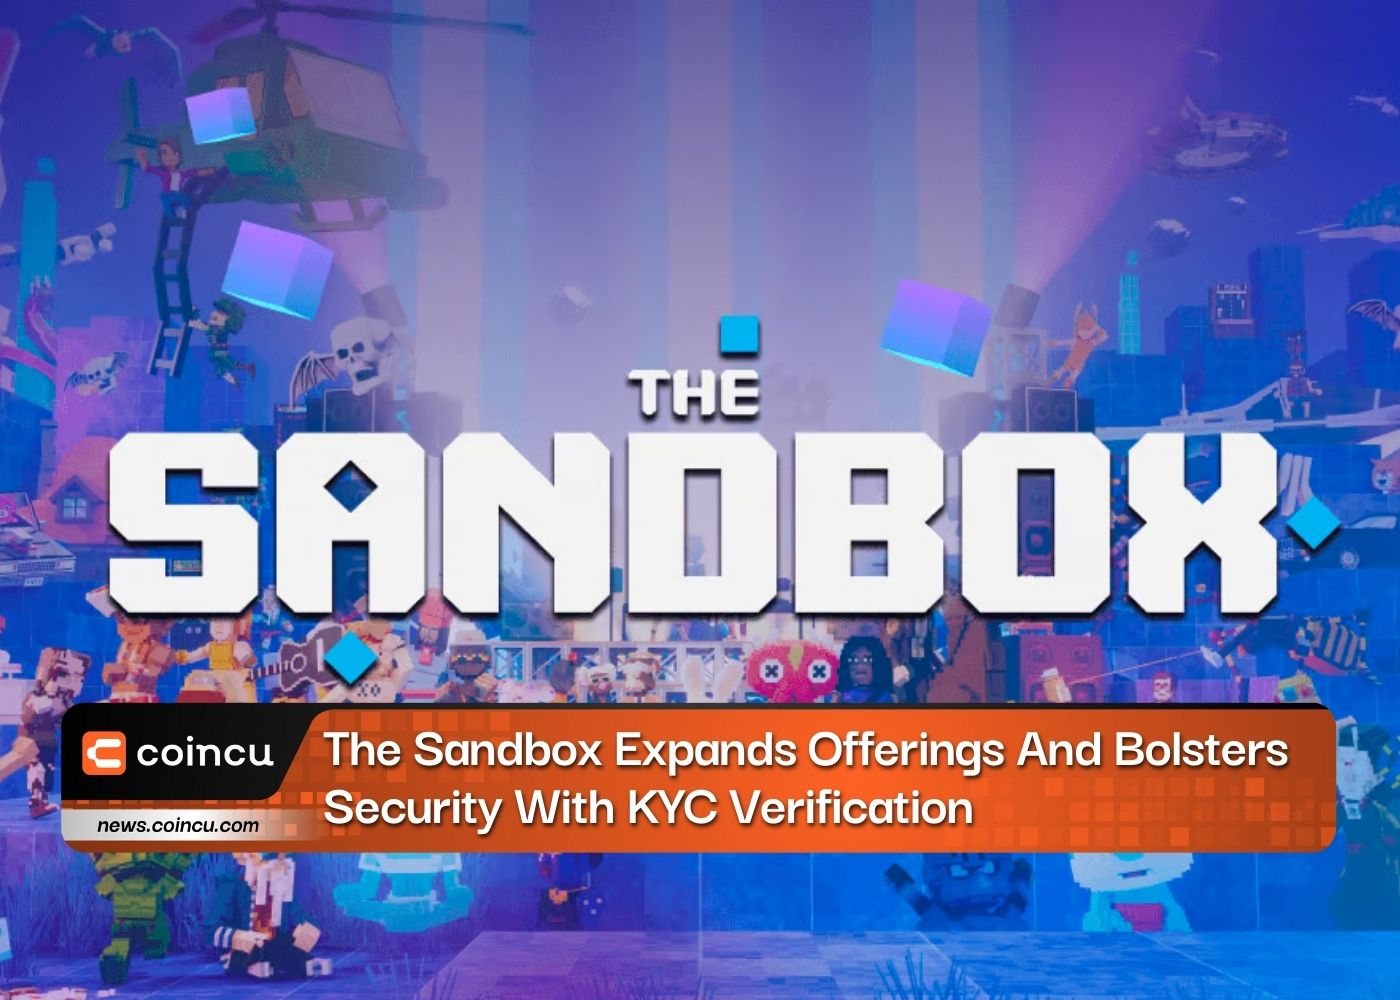 The Sandbox Expands Offerings And Bolsters Security With KYC Verification